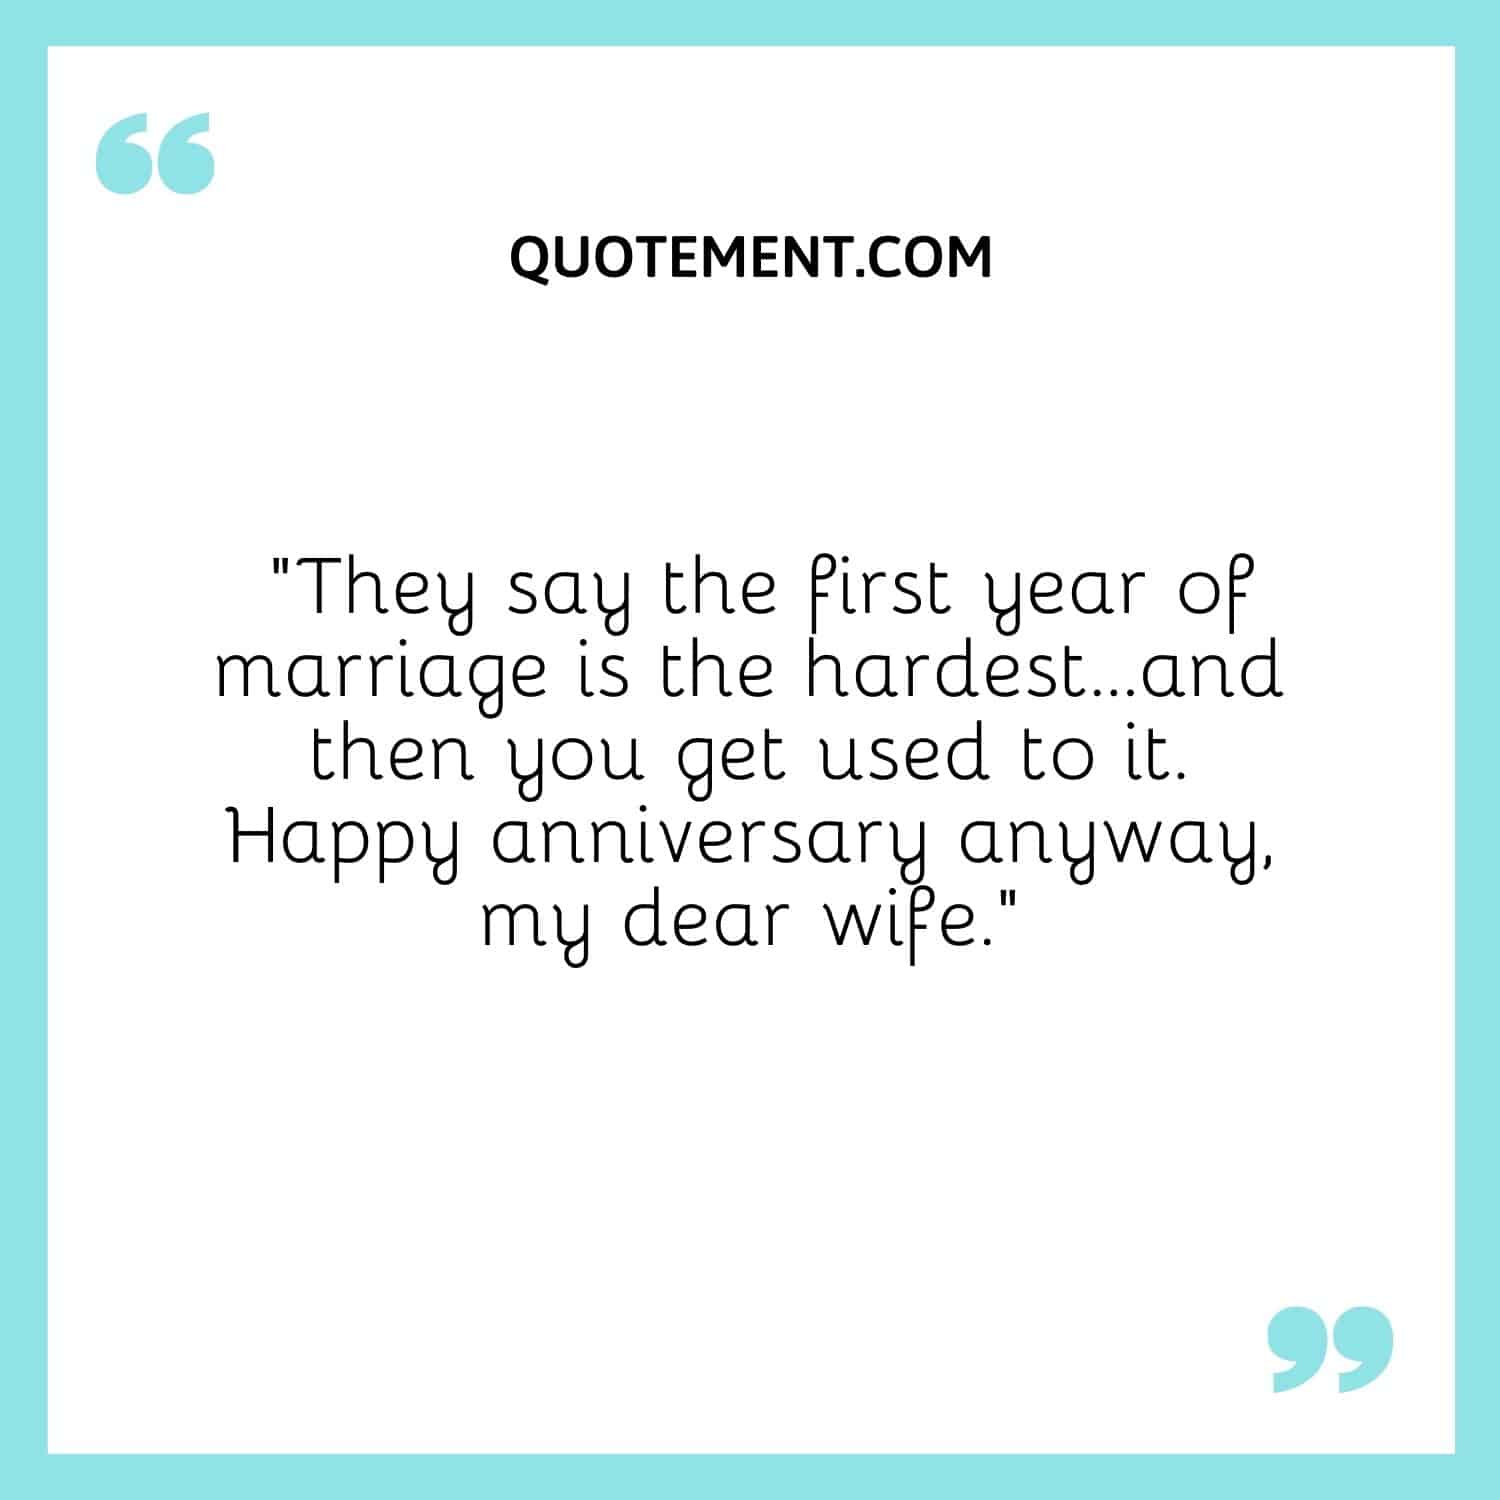 “They say the first year of marriage is the hardest…and then you get used to it. Happy anniversary anyway, my dear wife.”